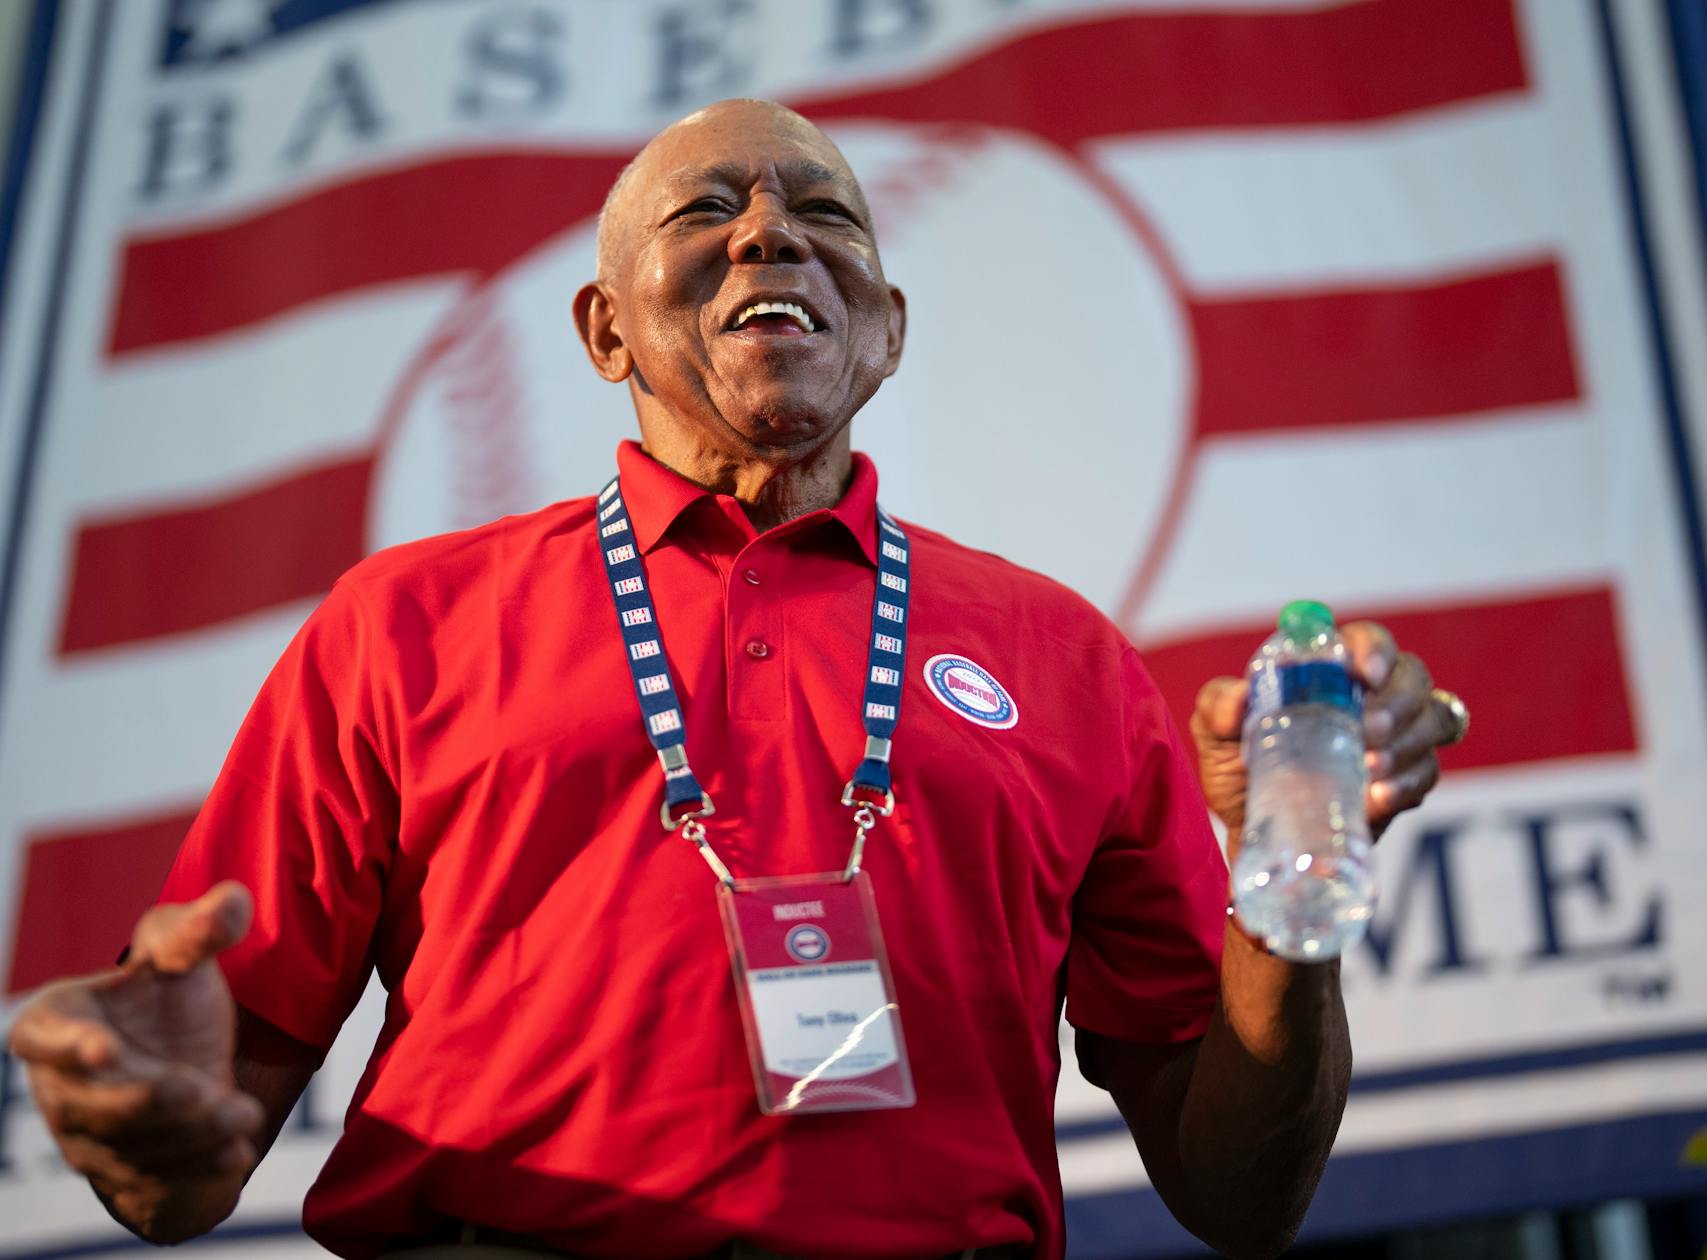 Tony Oliva is deeply affected by the death of two Hall of Fame brothers